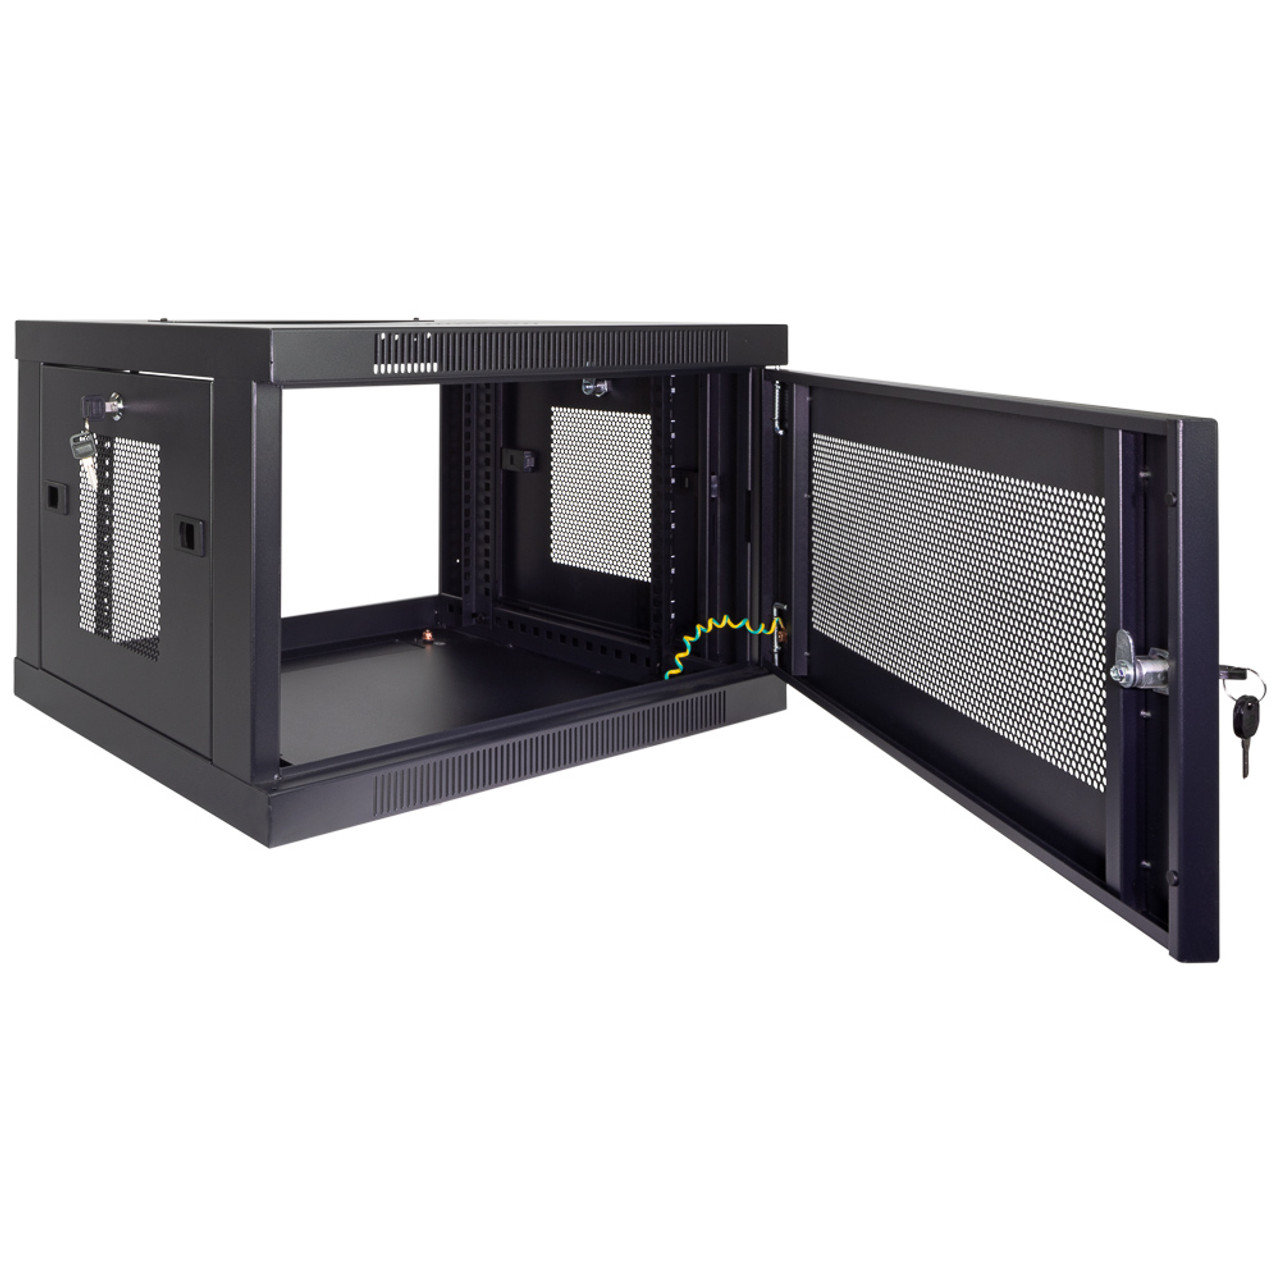 NavePoint 6U Wall Mount Network Cabinet, Perforated Server Enclosure, 19-inch width, 450mm depth